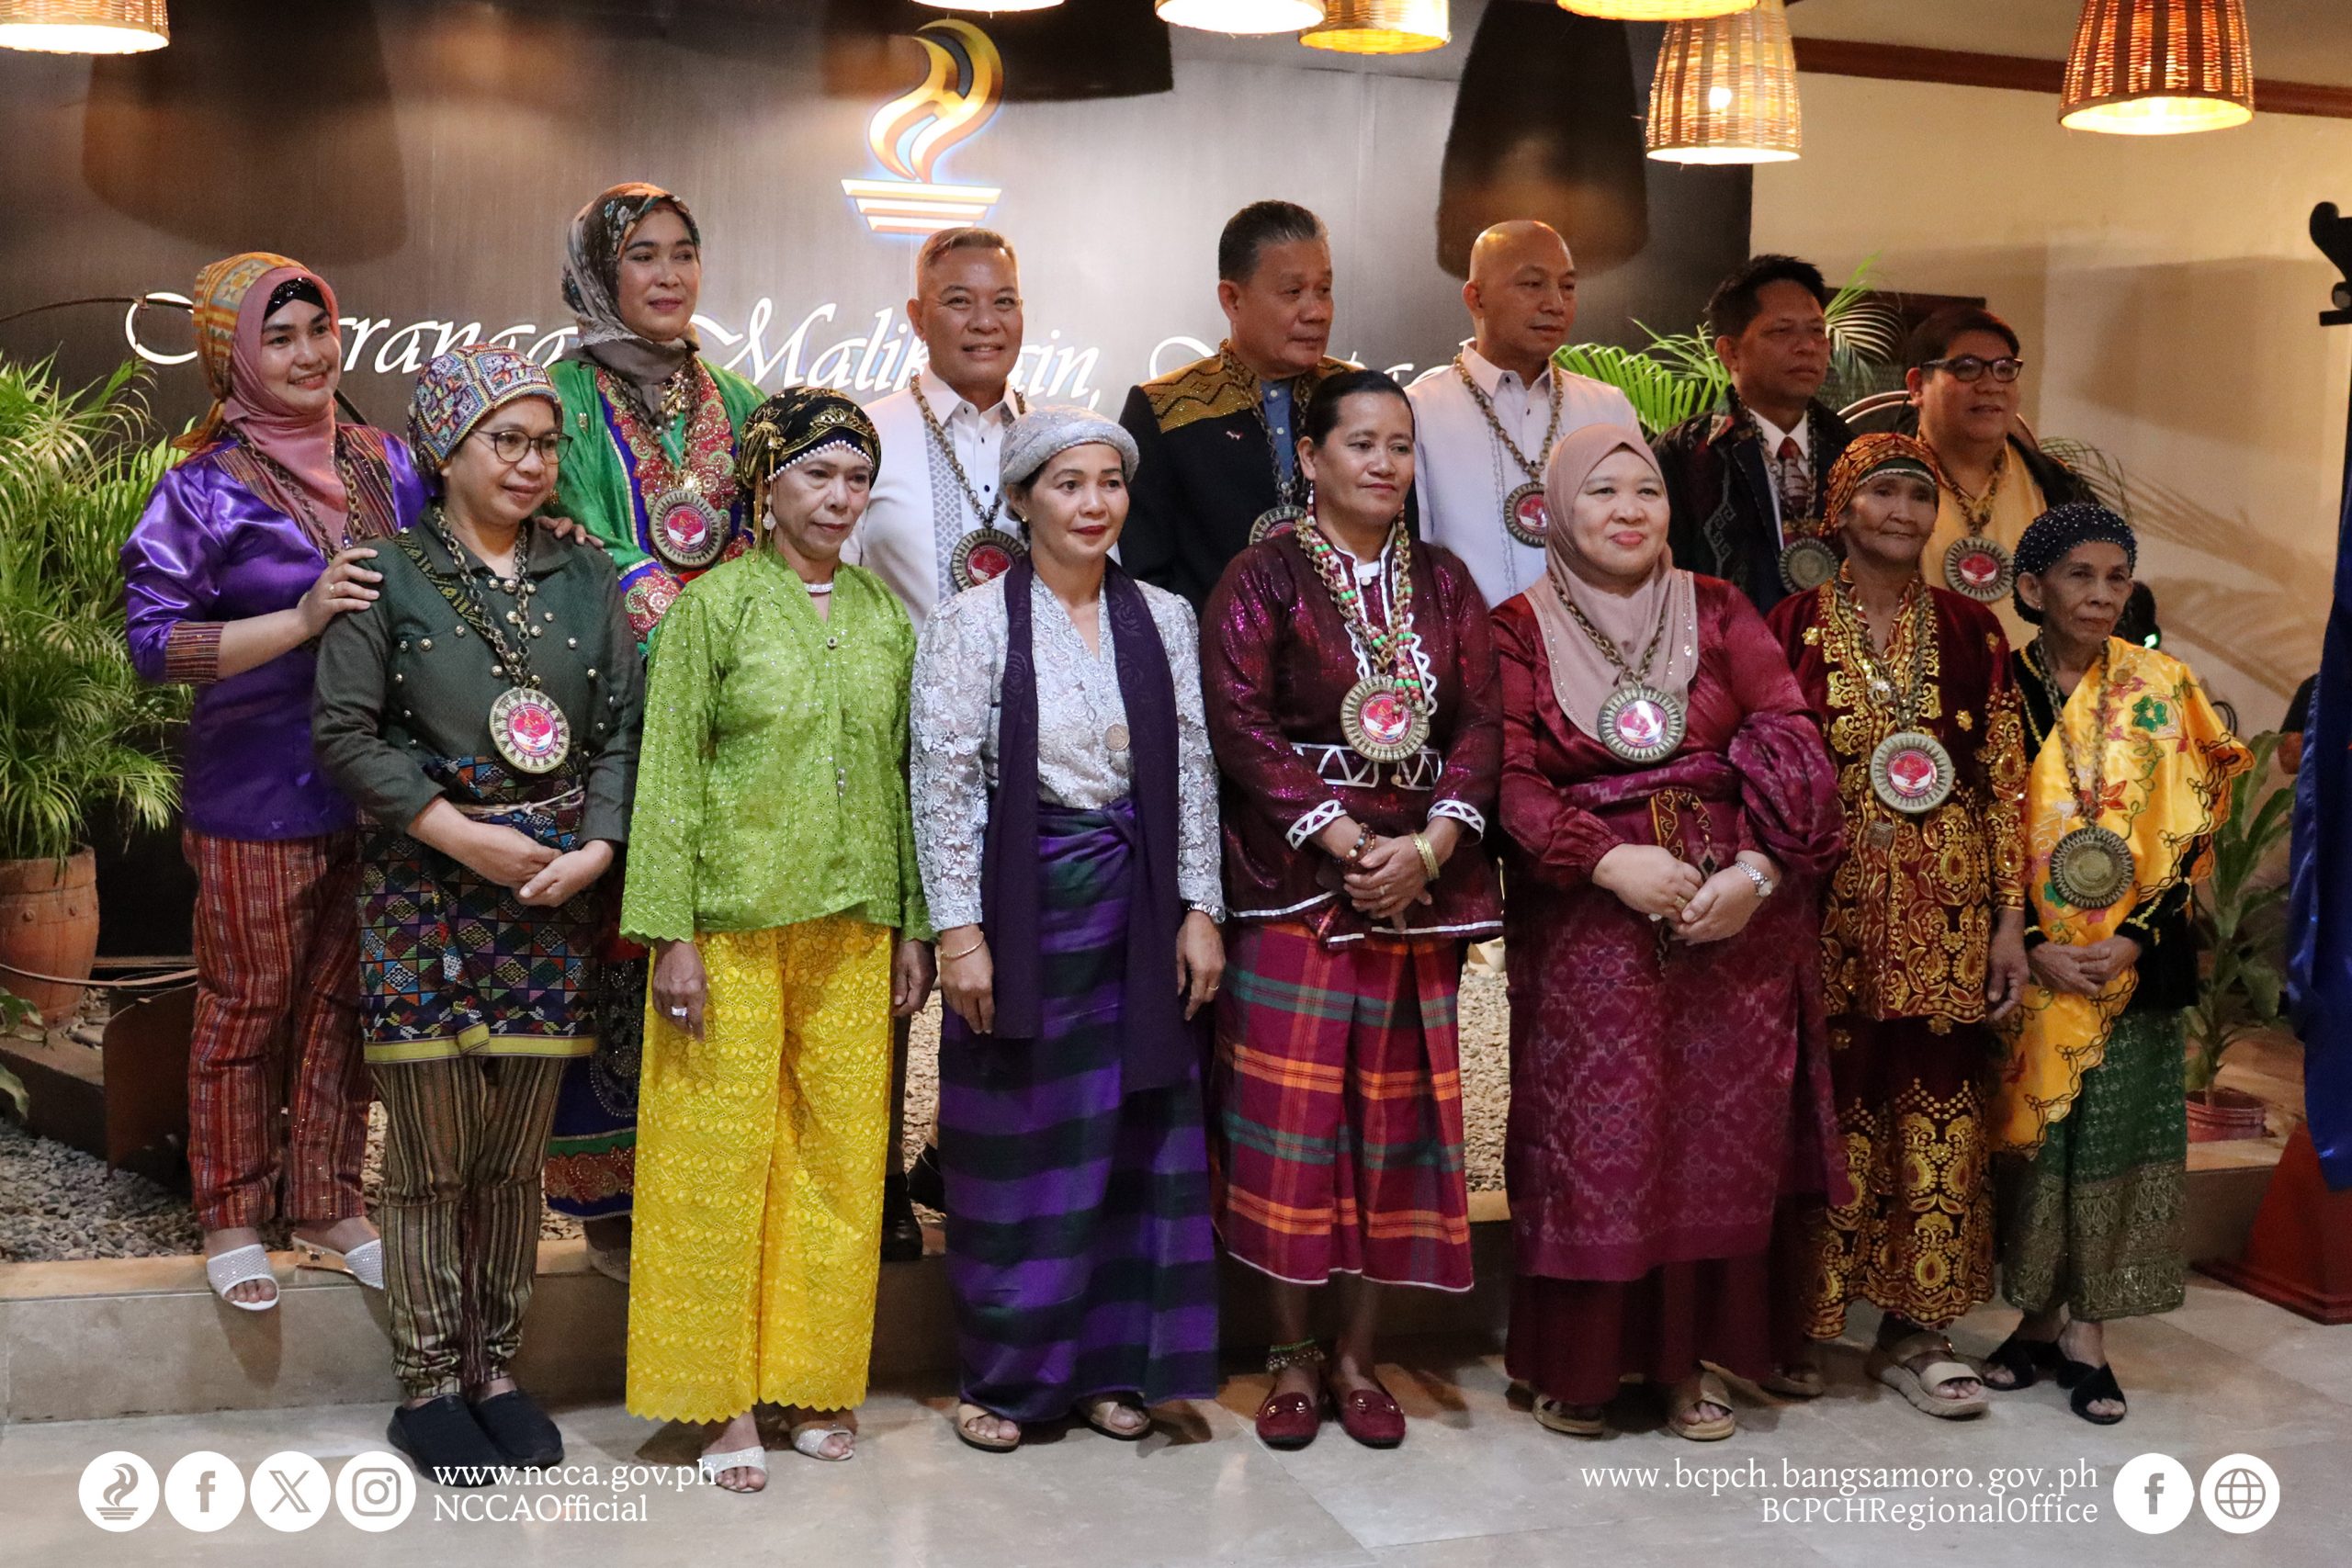 Recognition of Bangsamoro Cultural Artists and Artisans